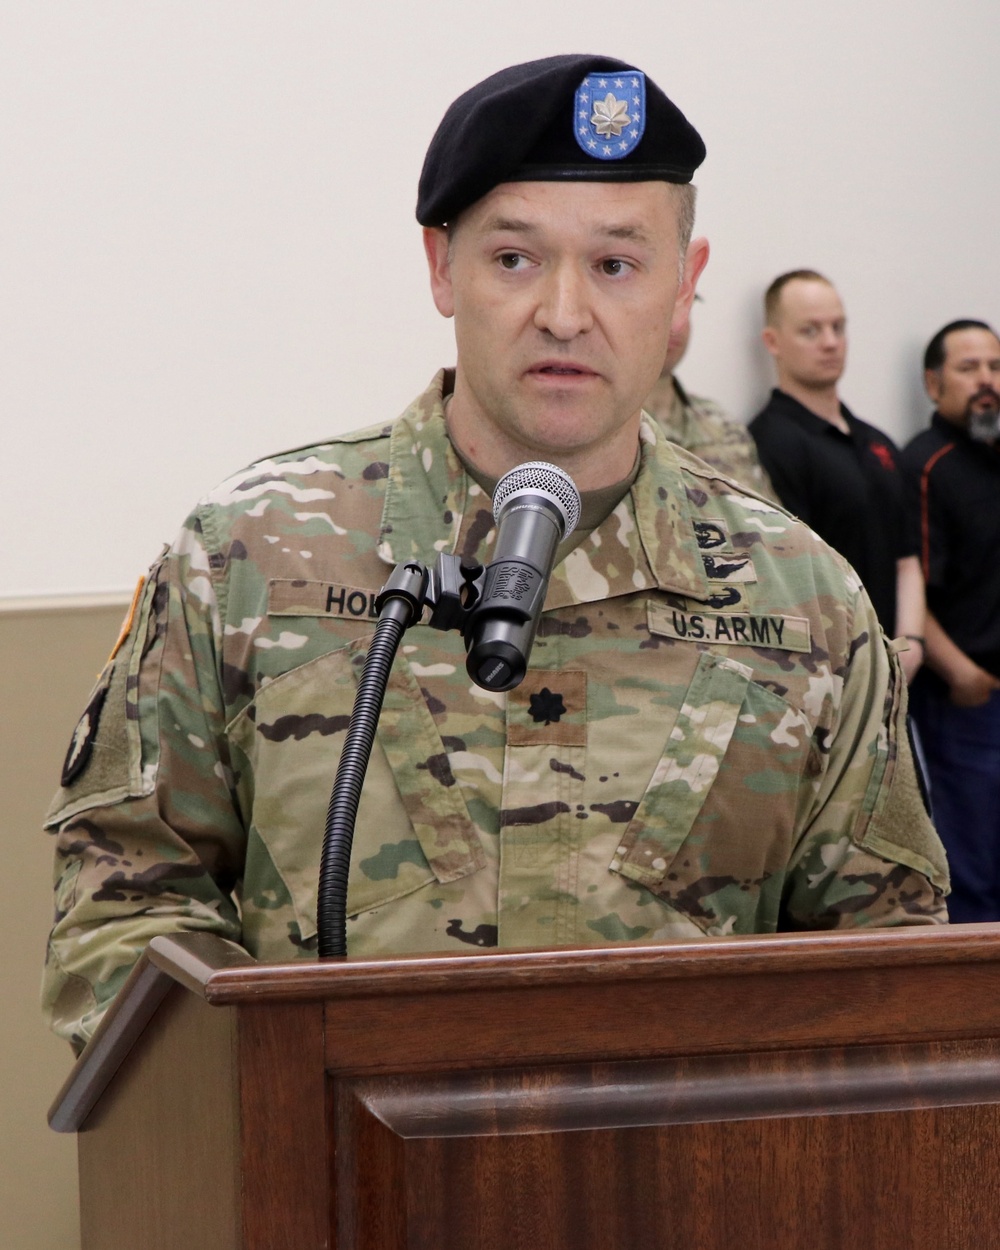 Kentucky native assumes command of Fort Campbell Warrior Transition Battalion